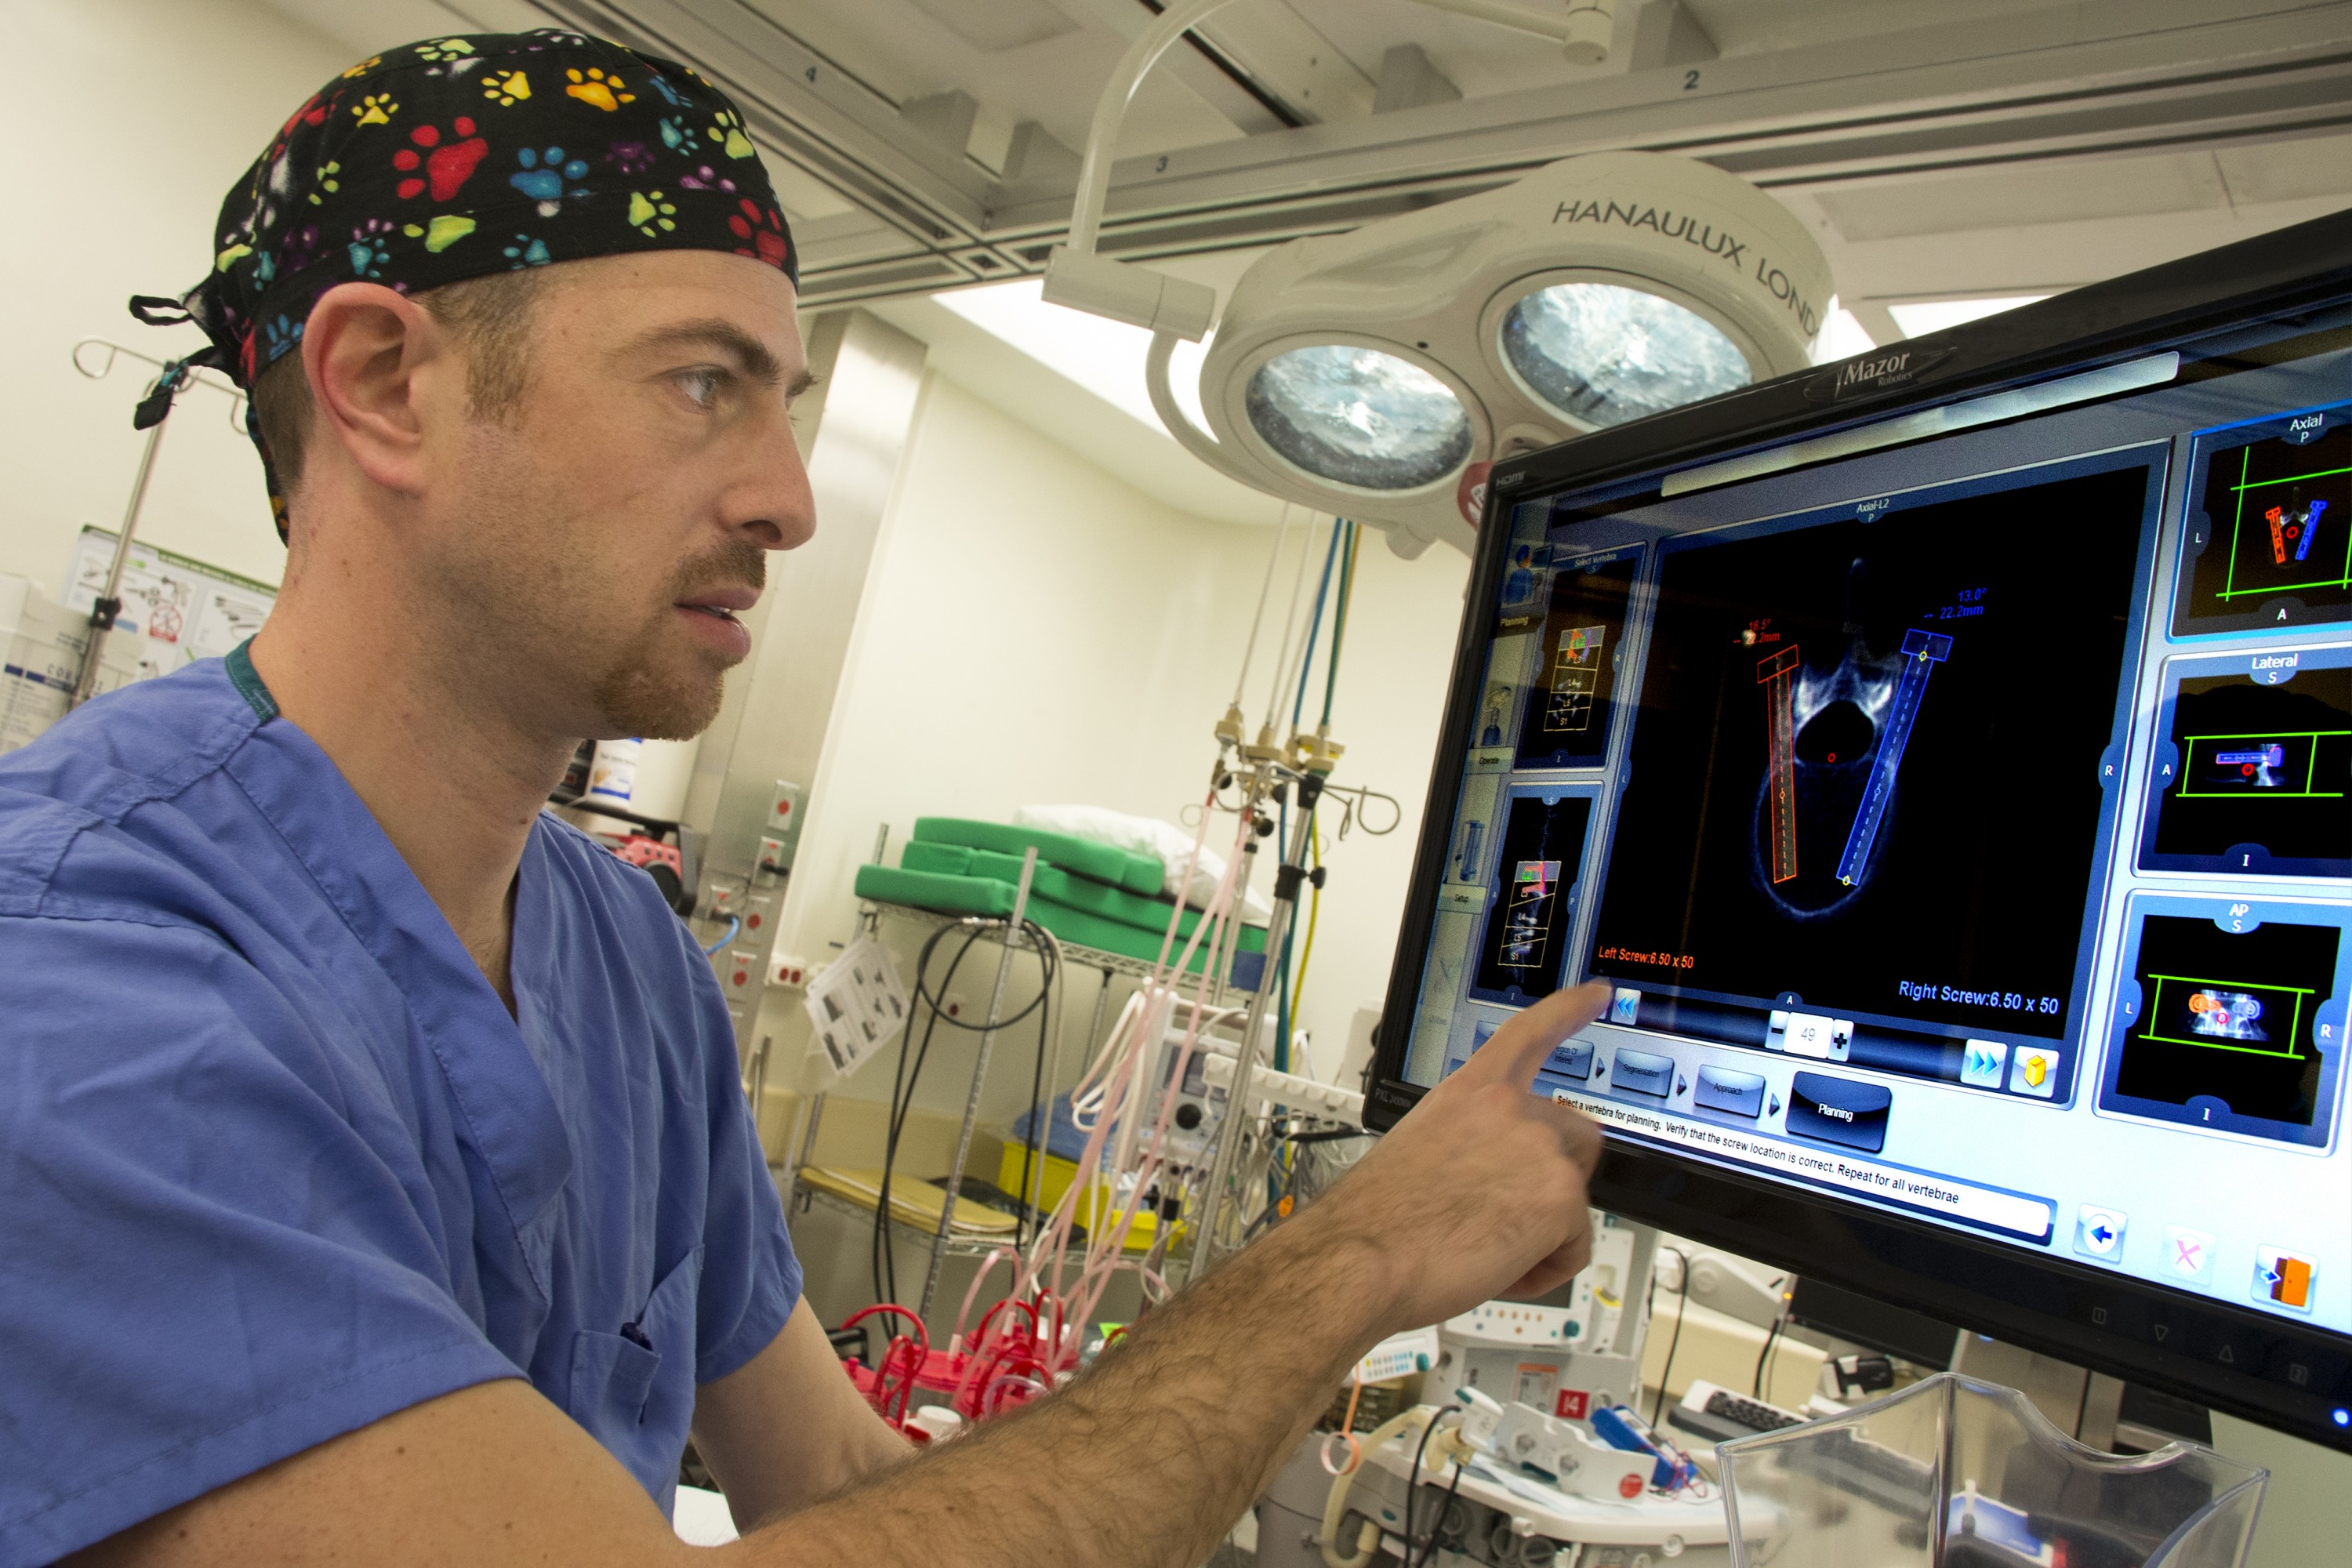 Dr. Isaac Moss of the UConn Musculoskeletal Institute will be New England’s and Connecticut’s first surgeon to use pioneering robotic guidance technology to assist him during spine surgery at UConn John Dempsey Hospital. (Janine Gelineau/UConn Health Photo)